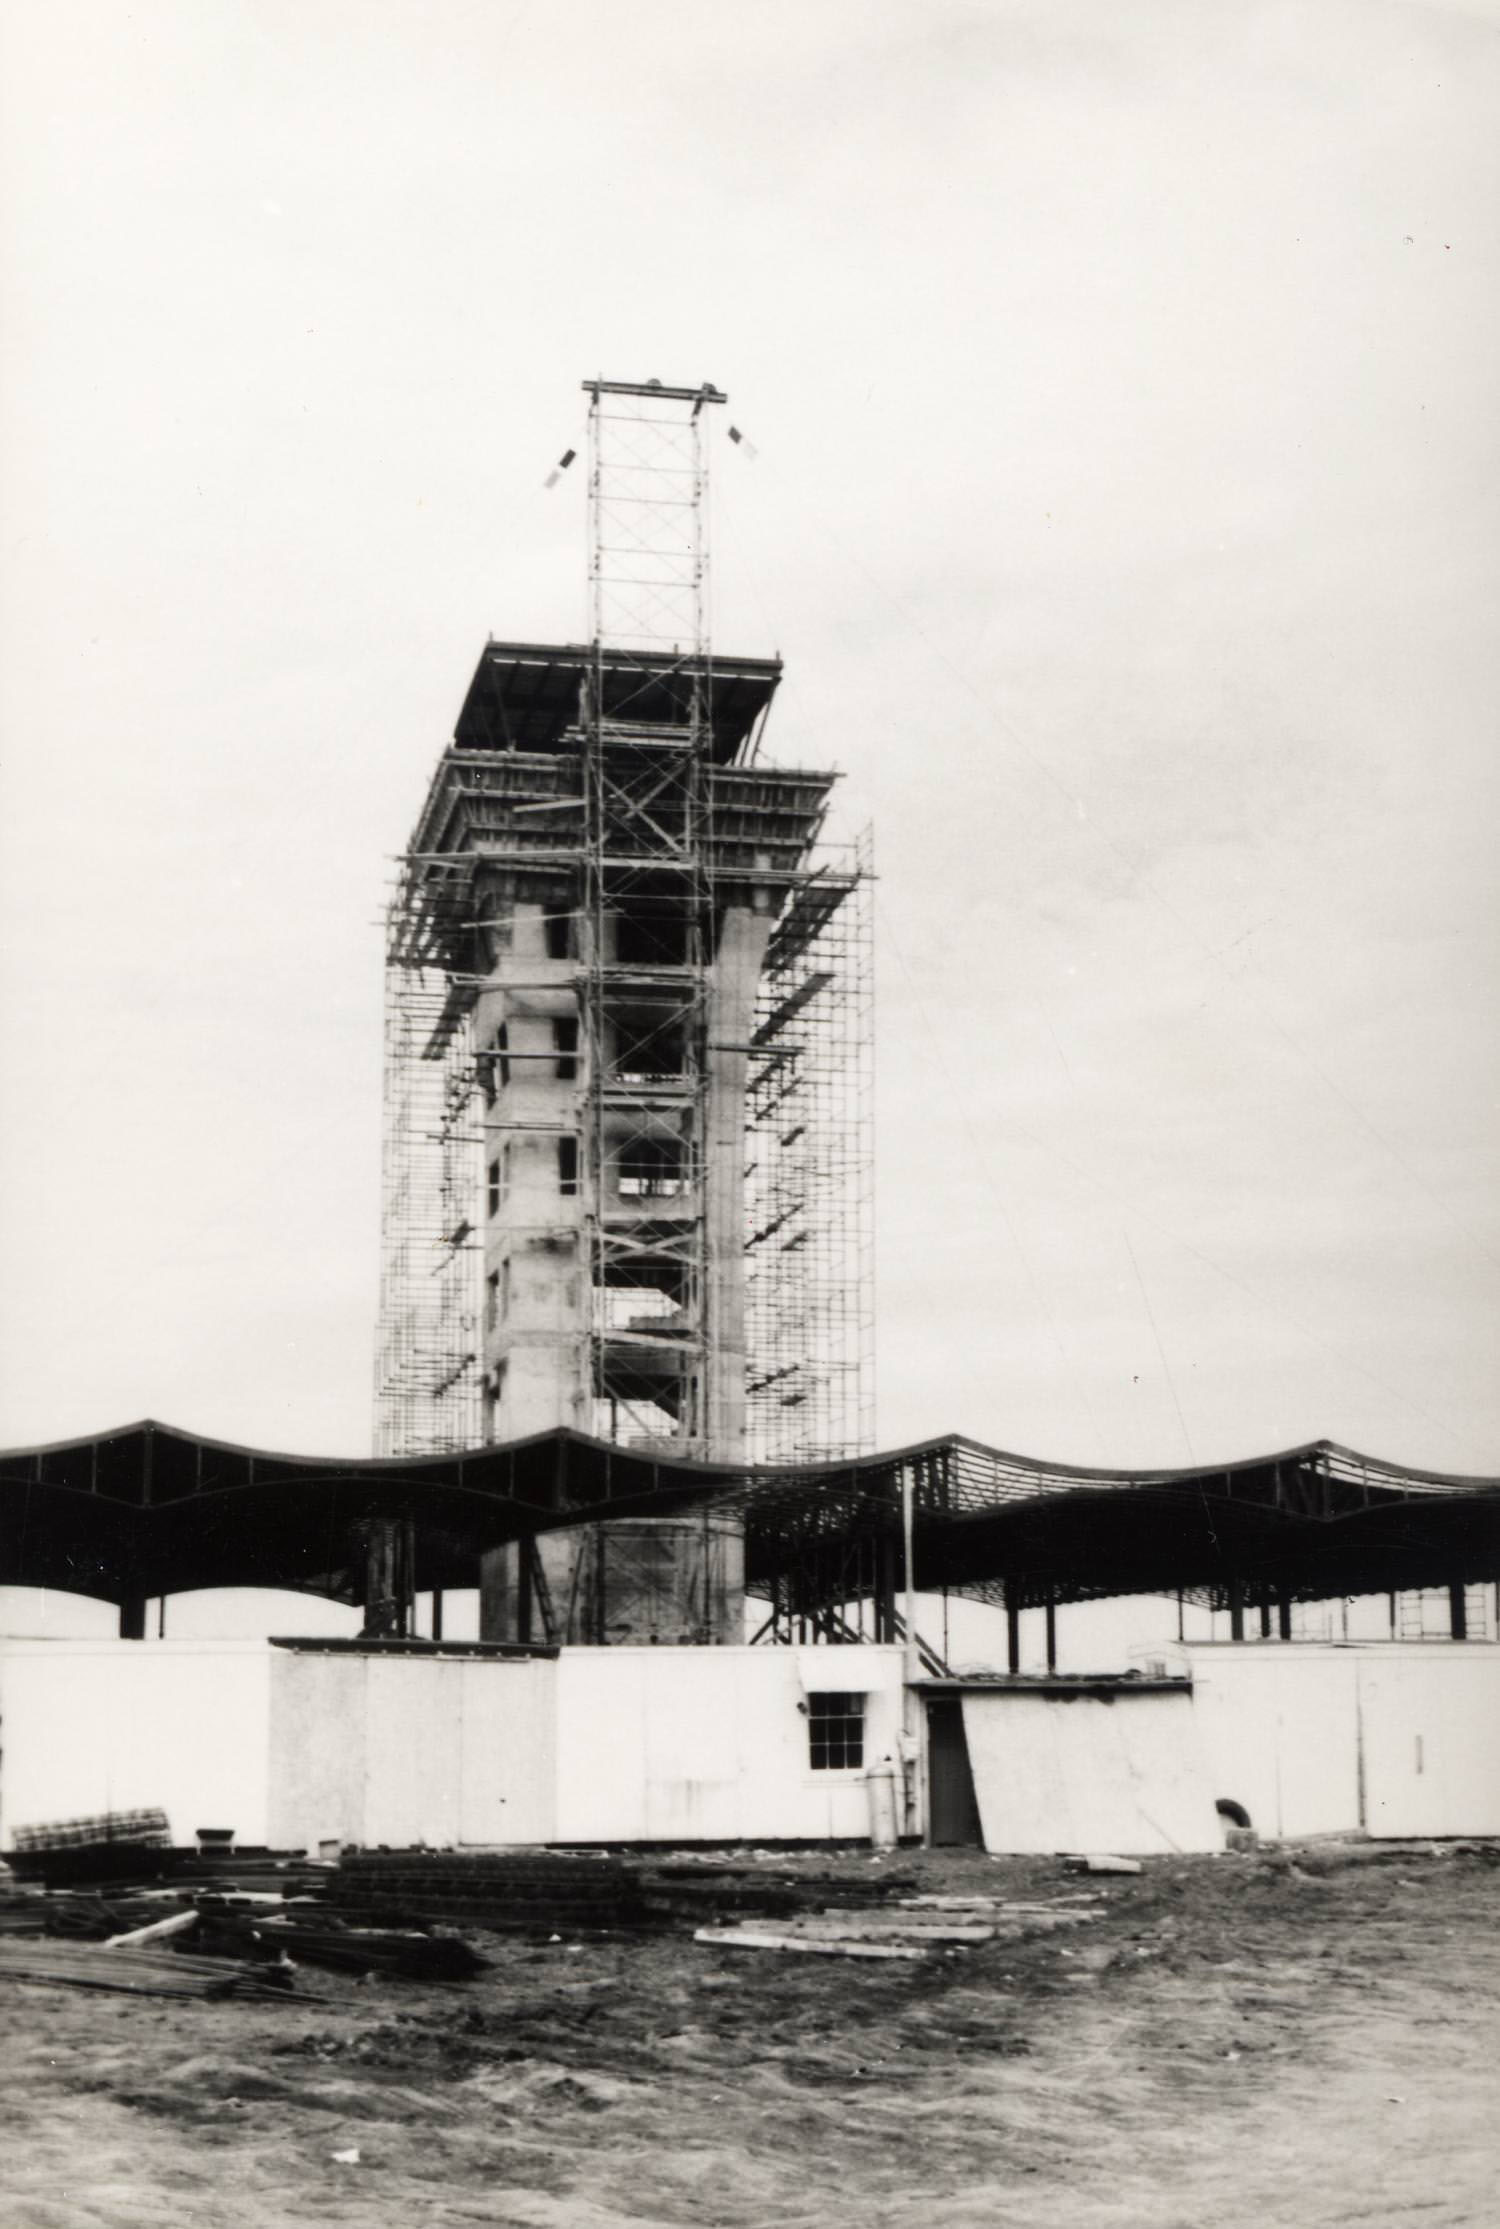 Construction of the control tower at Mueller Municipal Airport in Austin, Texas, 1960